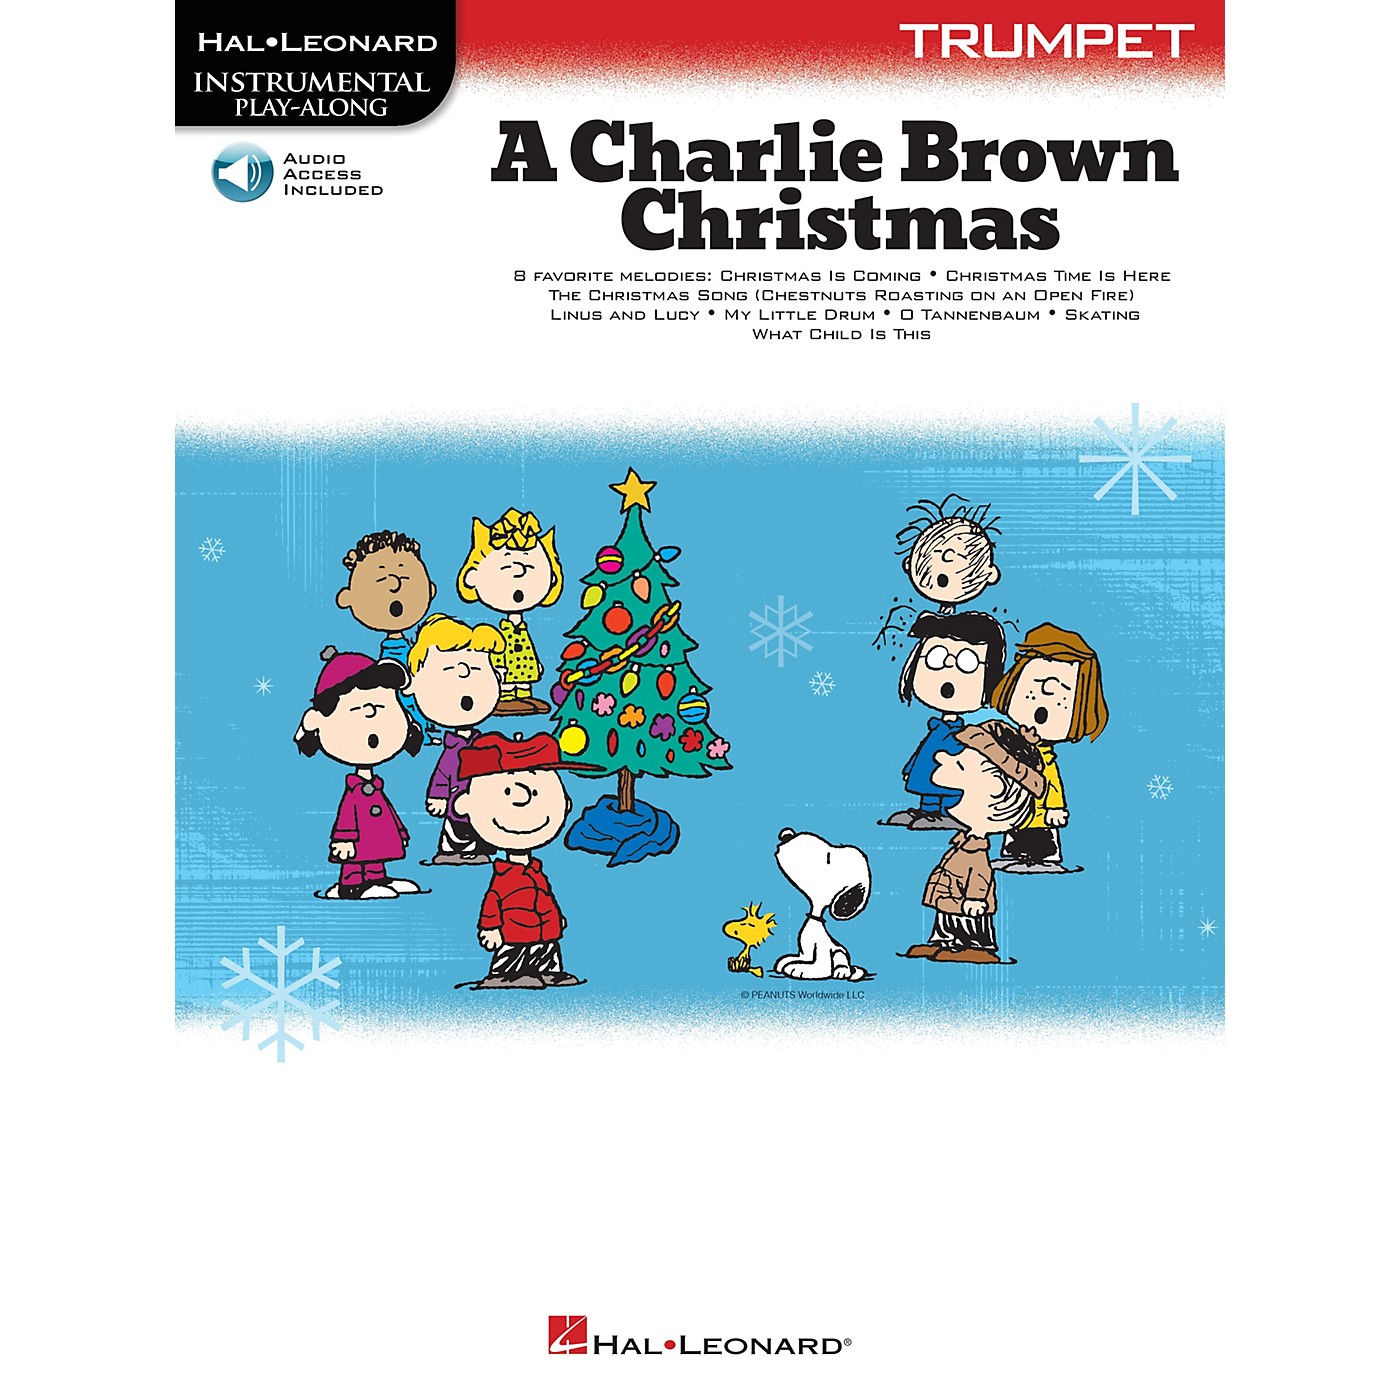 Hal Leonard A Charlie Brown Christmas - Instrumental Play-Along Songbook for Trumpet Book/Audio Online thumbnail